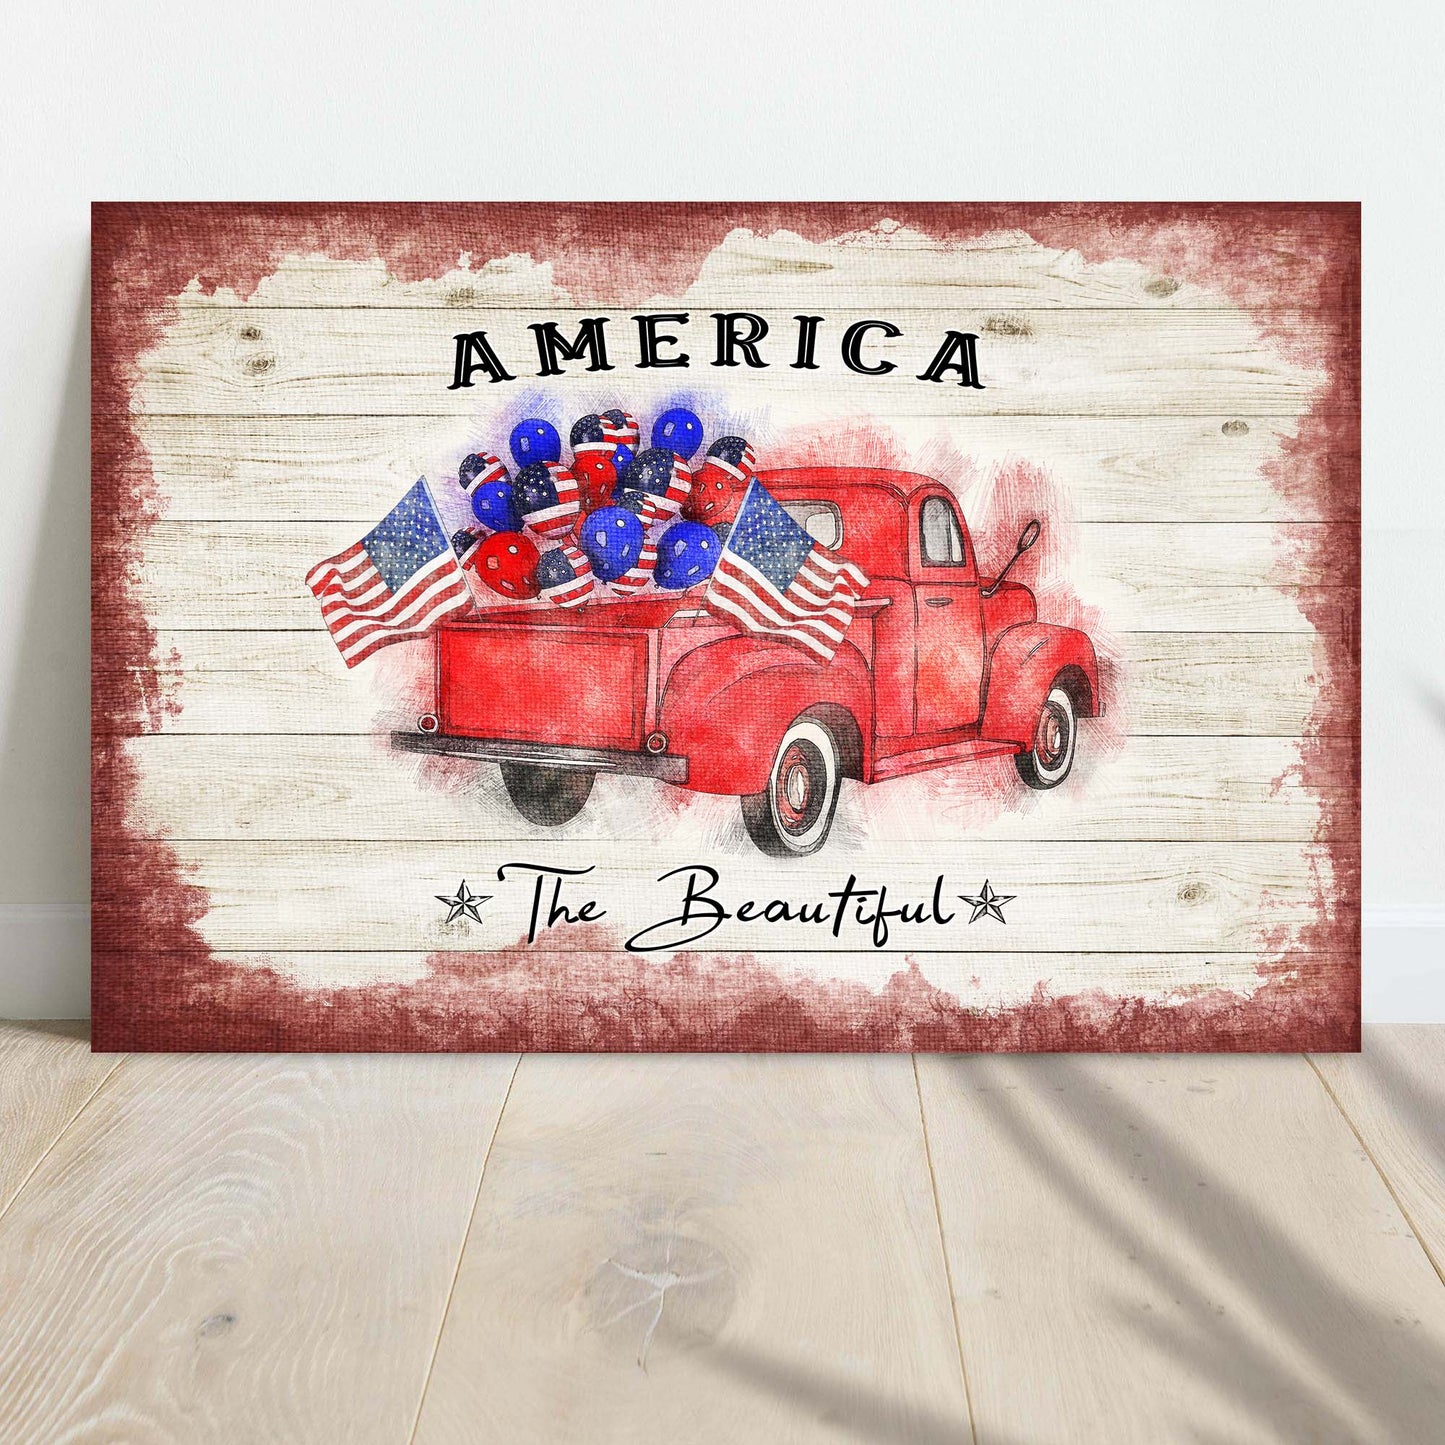 America The Beautiful Sign II - Image by Tailored Canvases